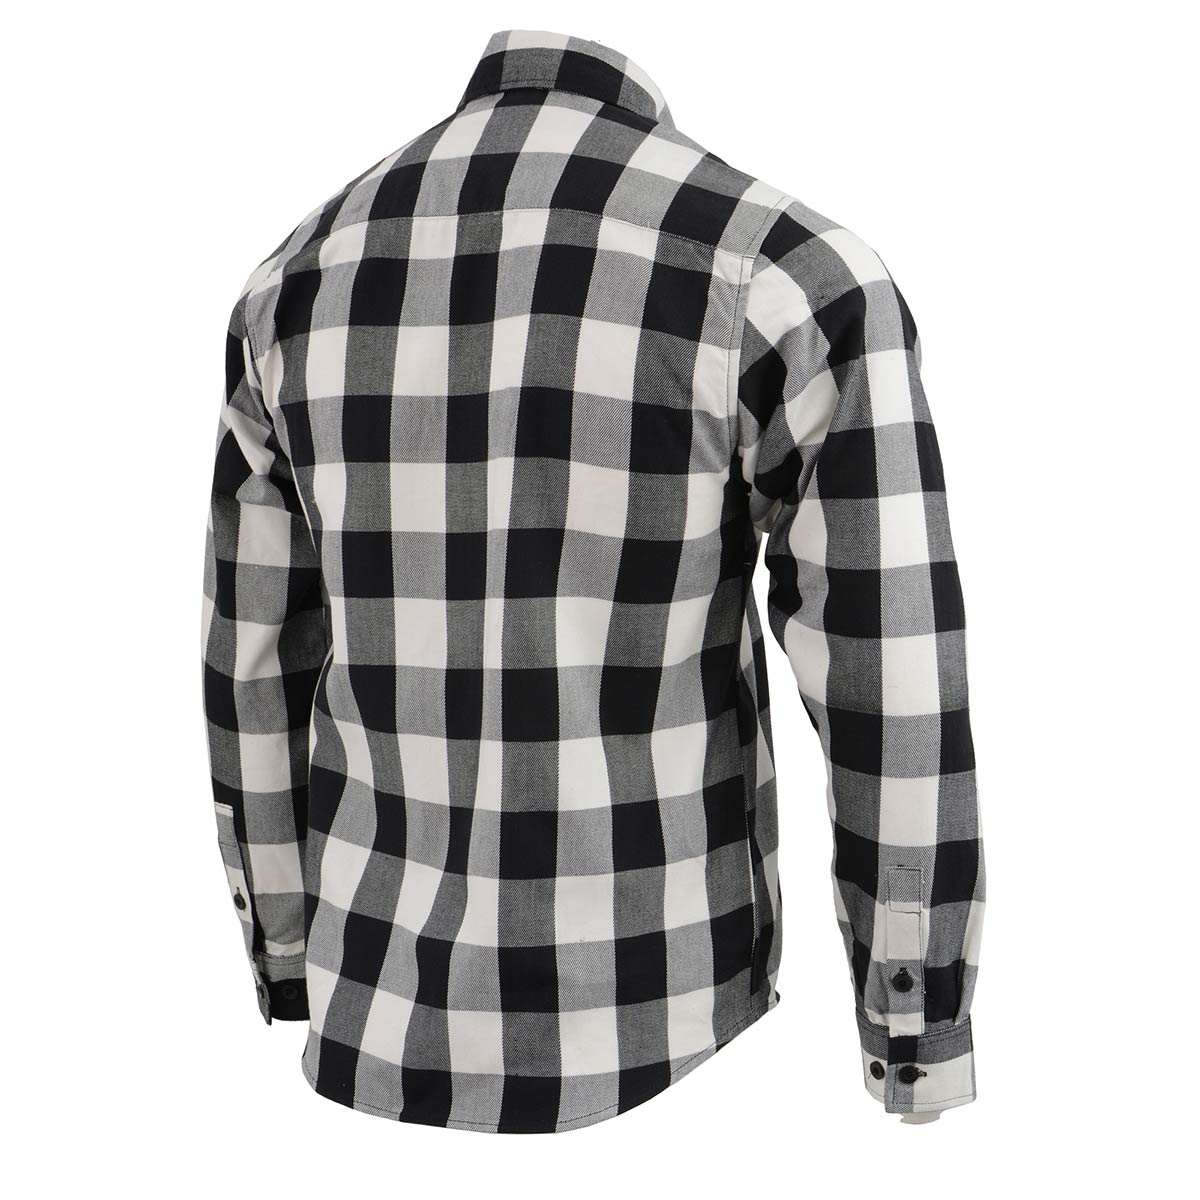 Milwaukee Leather Men's Flannel Plaid Shirt Black and White Long Sleeve Cotton Button Down Shirt MNG11633